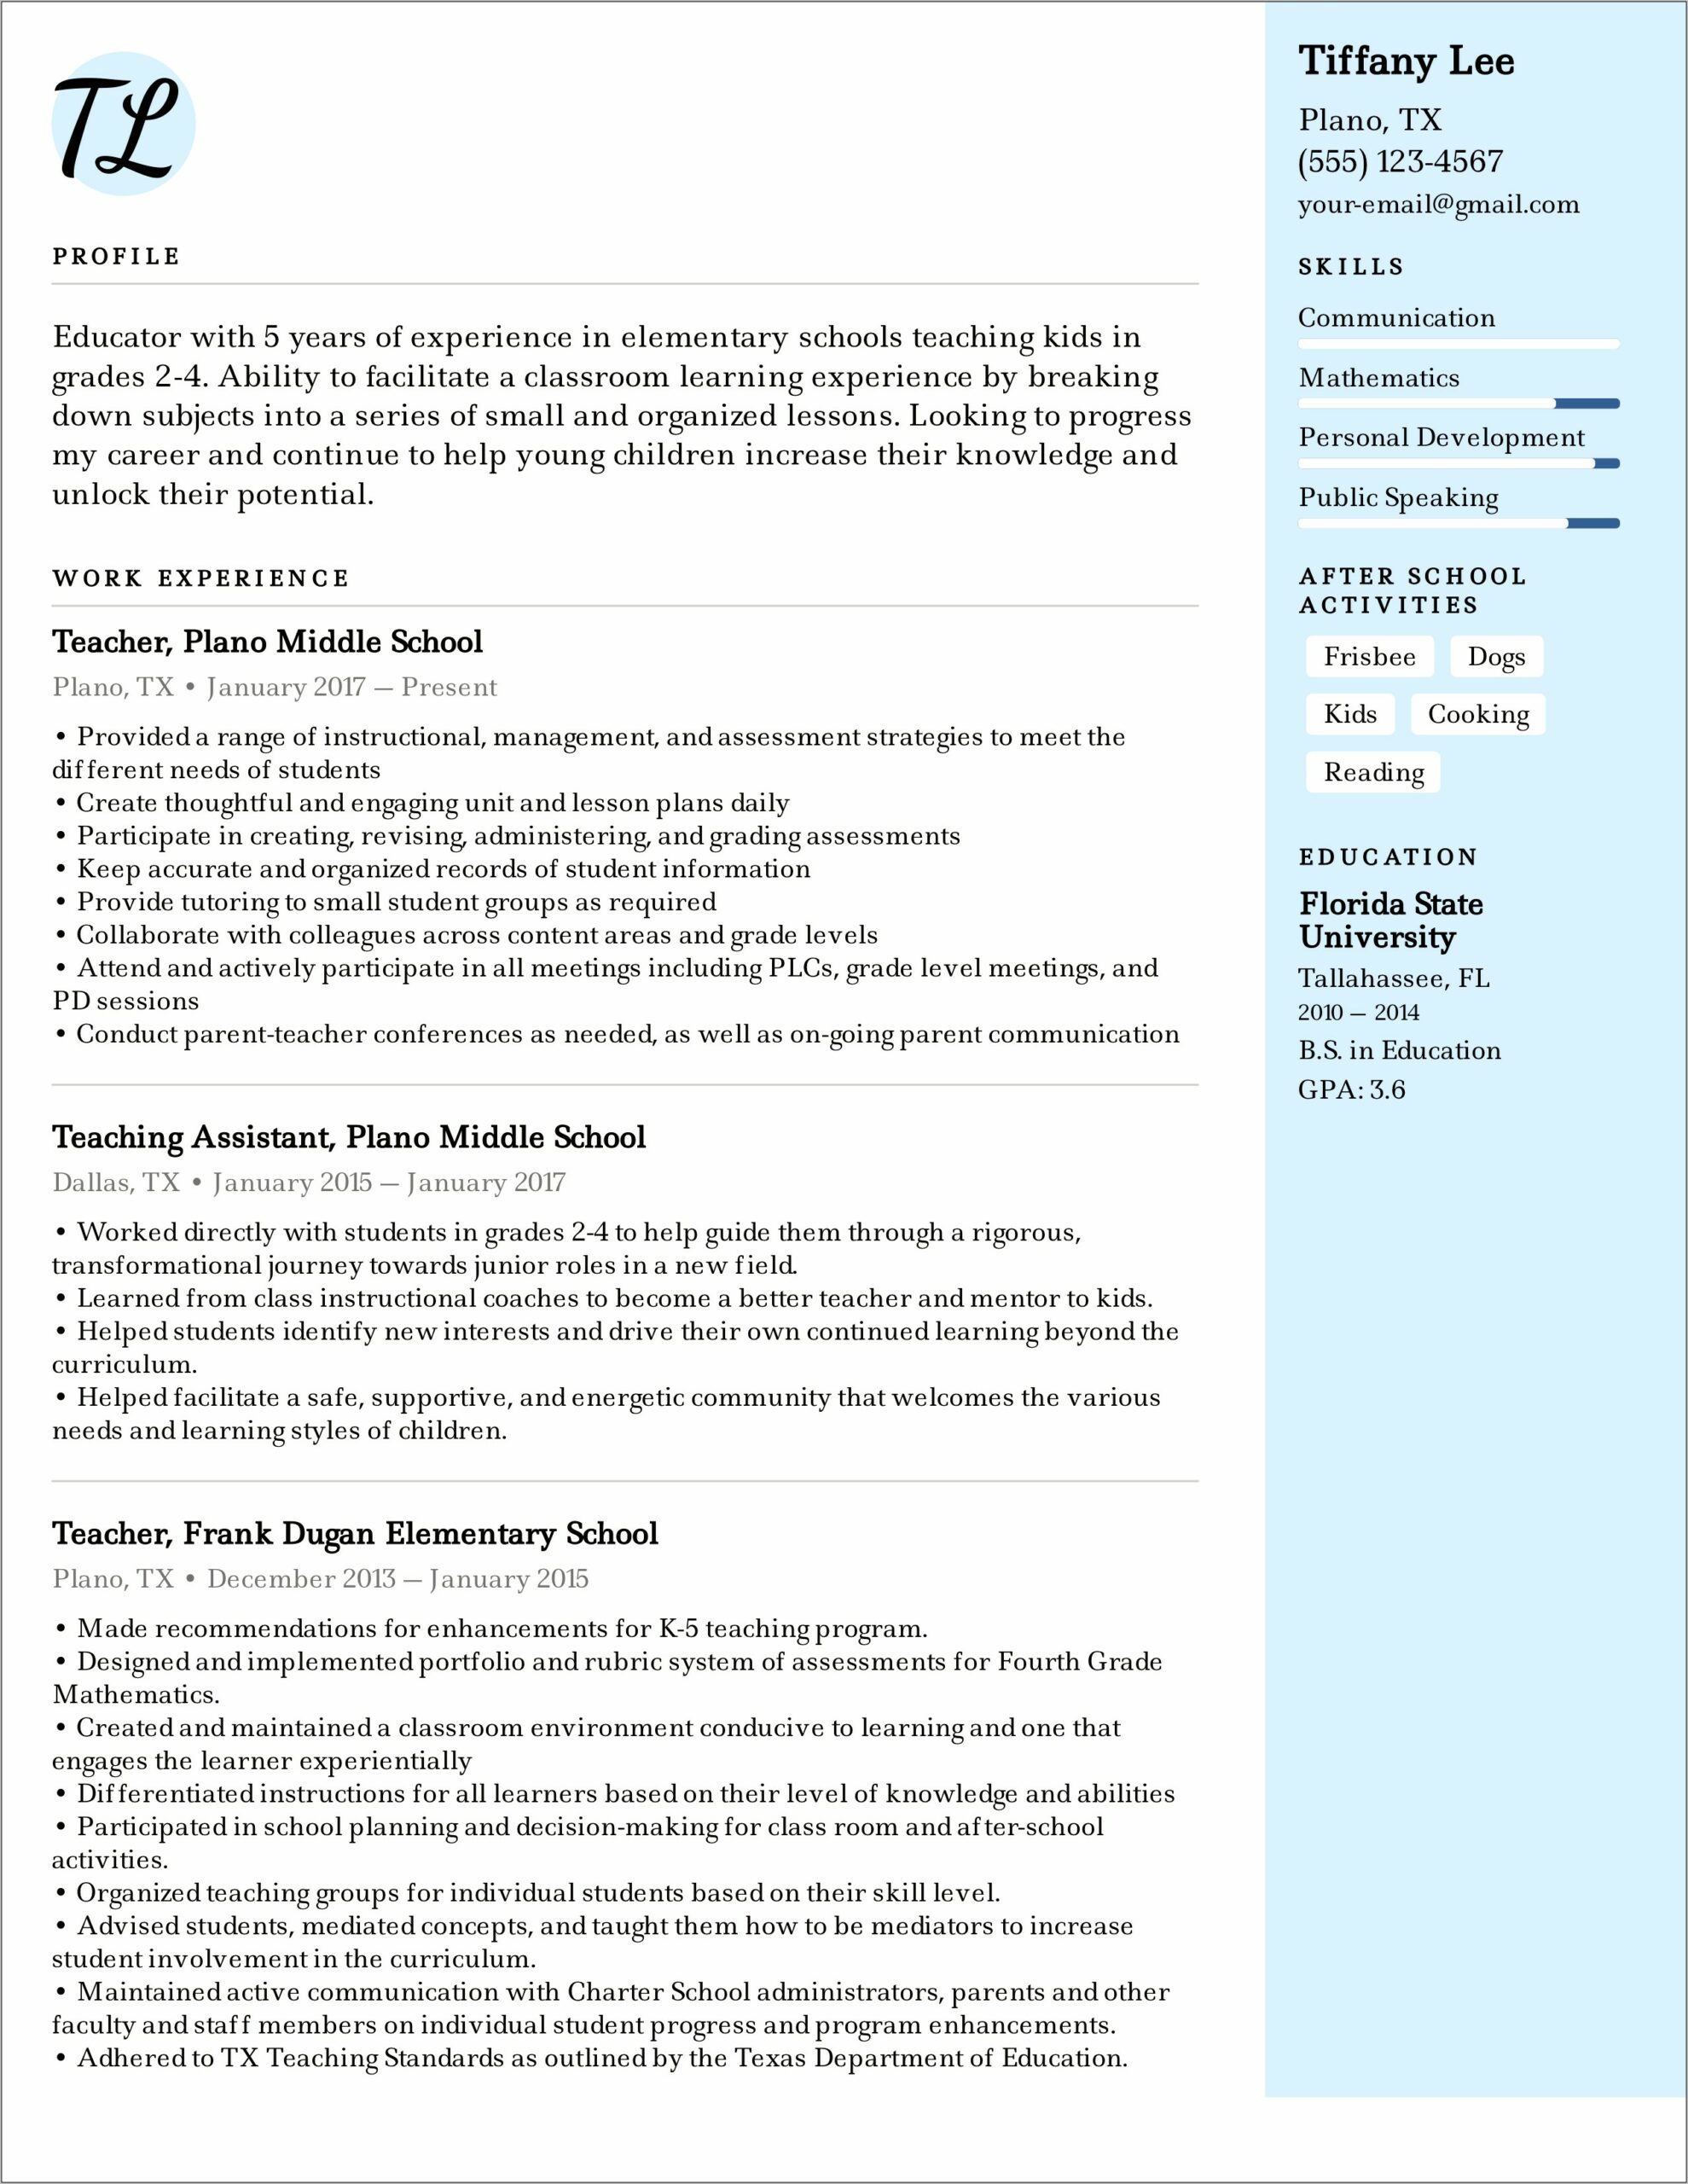 Resume To Apply For A Teaching In School